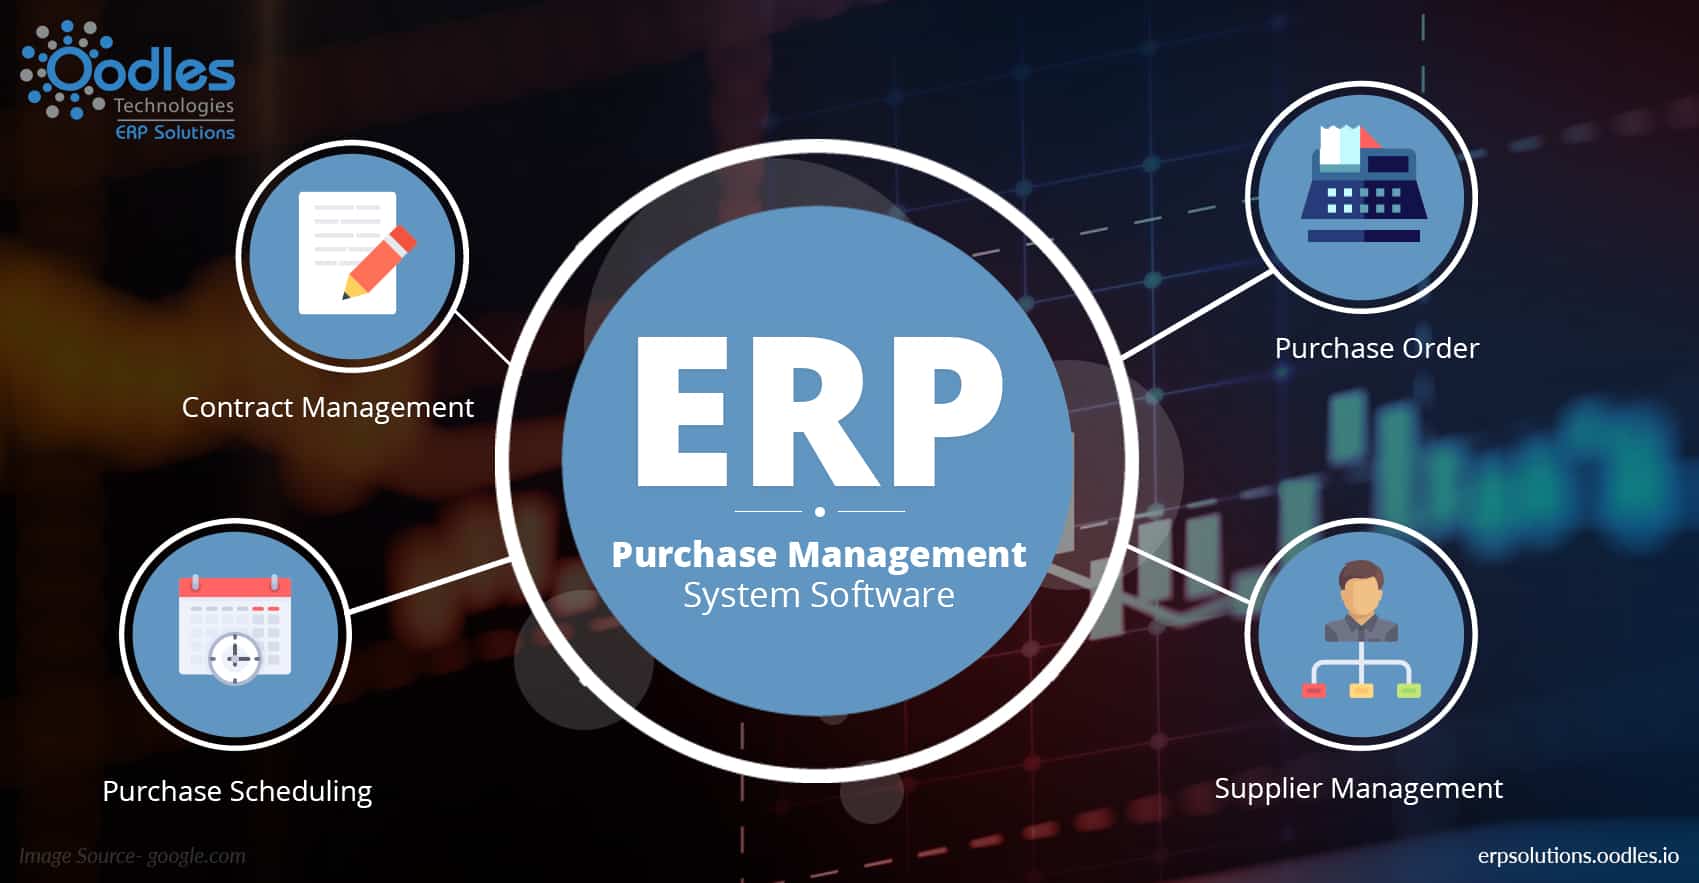 ERP purchase management system software: Life Line of an Industry